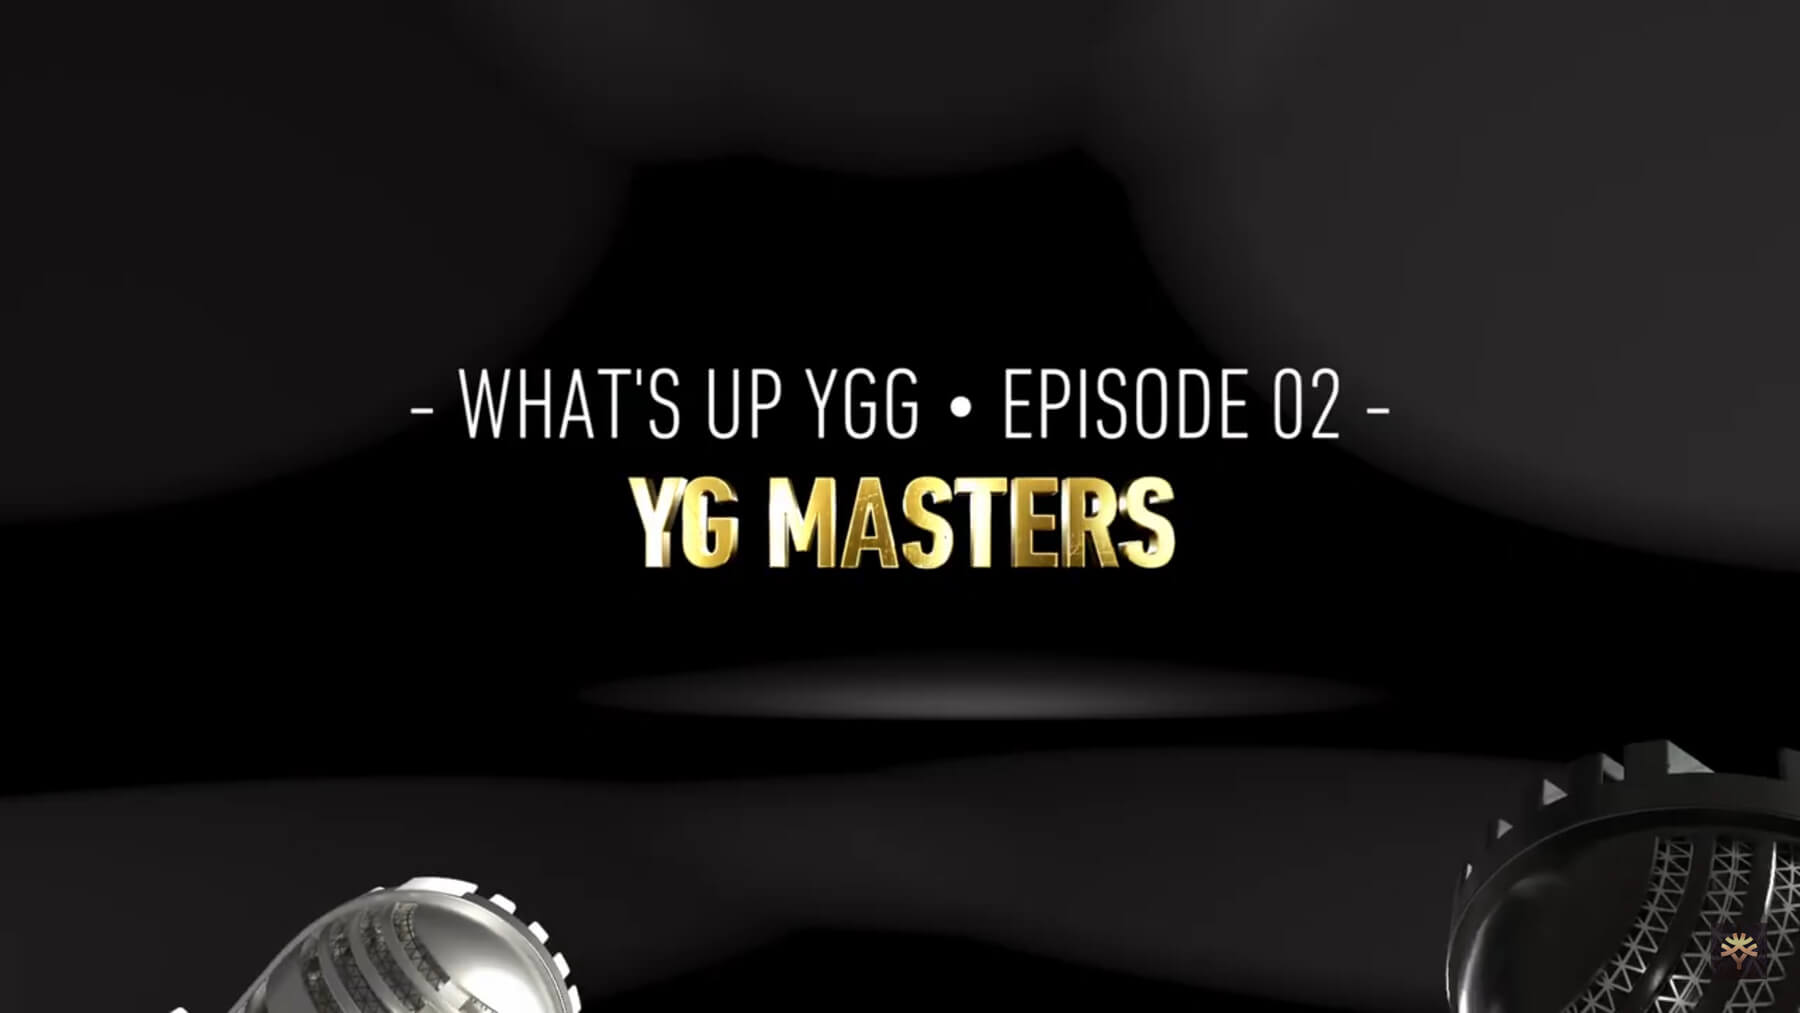 Yggdrasil Podcastide sarja „What’s up YGG” teine episood